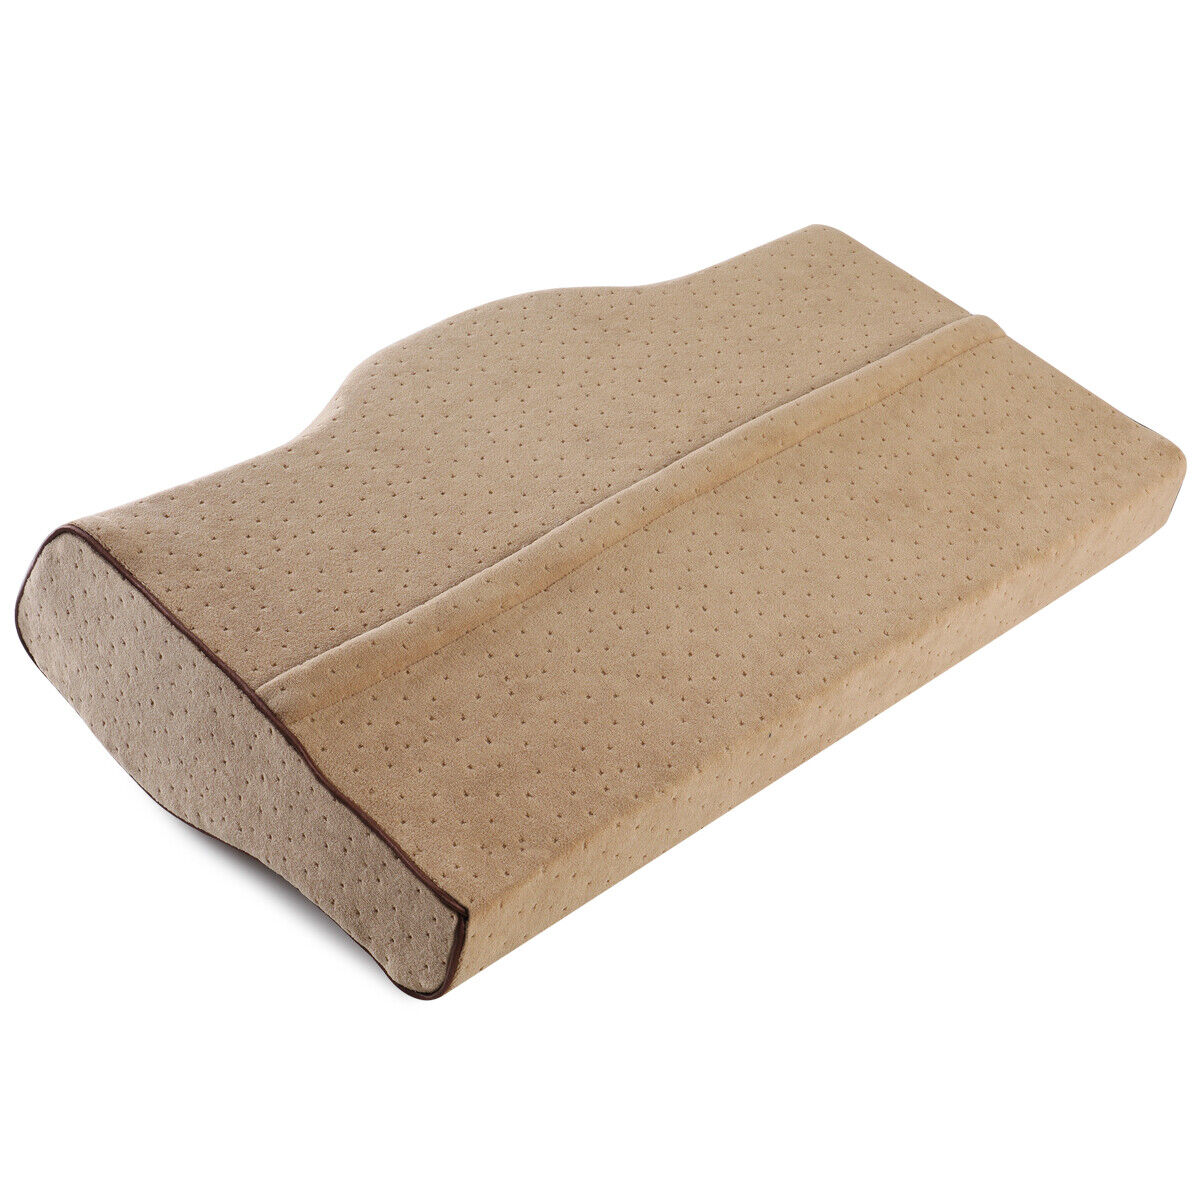 Stock Preferred Contour Cervical Memory Foam Bed Pillow Support Camel